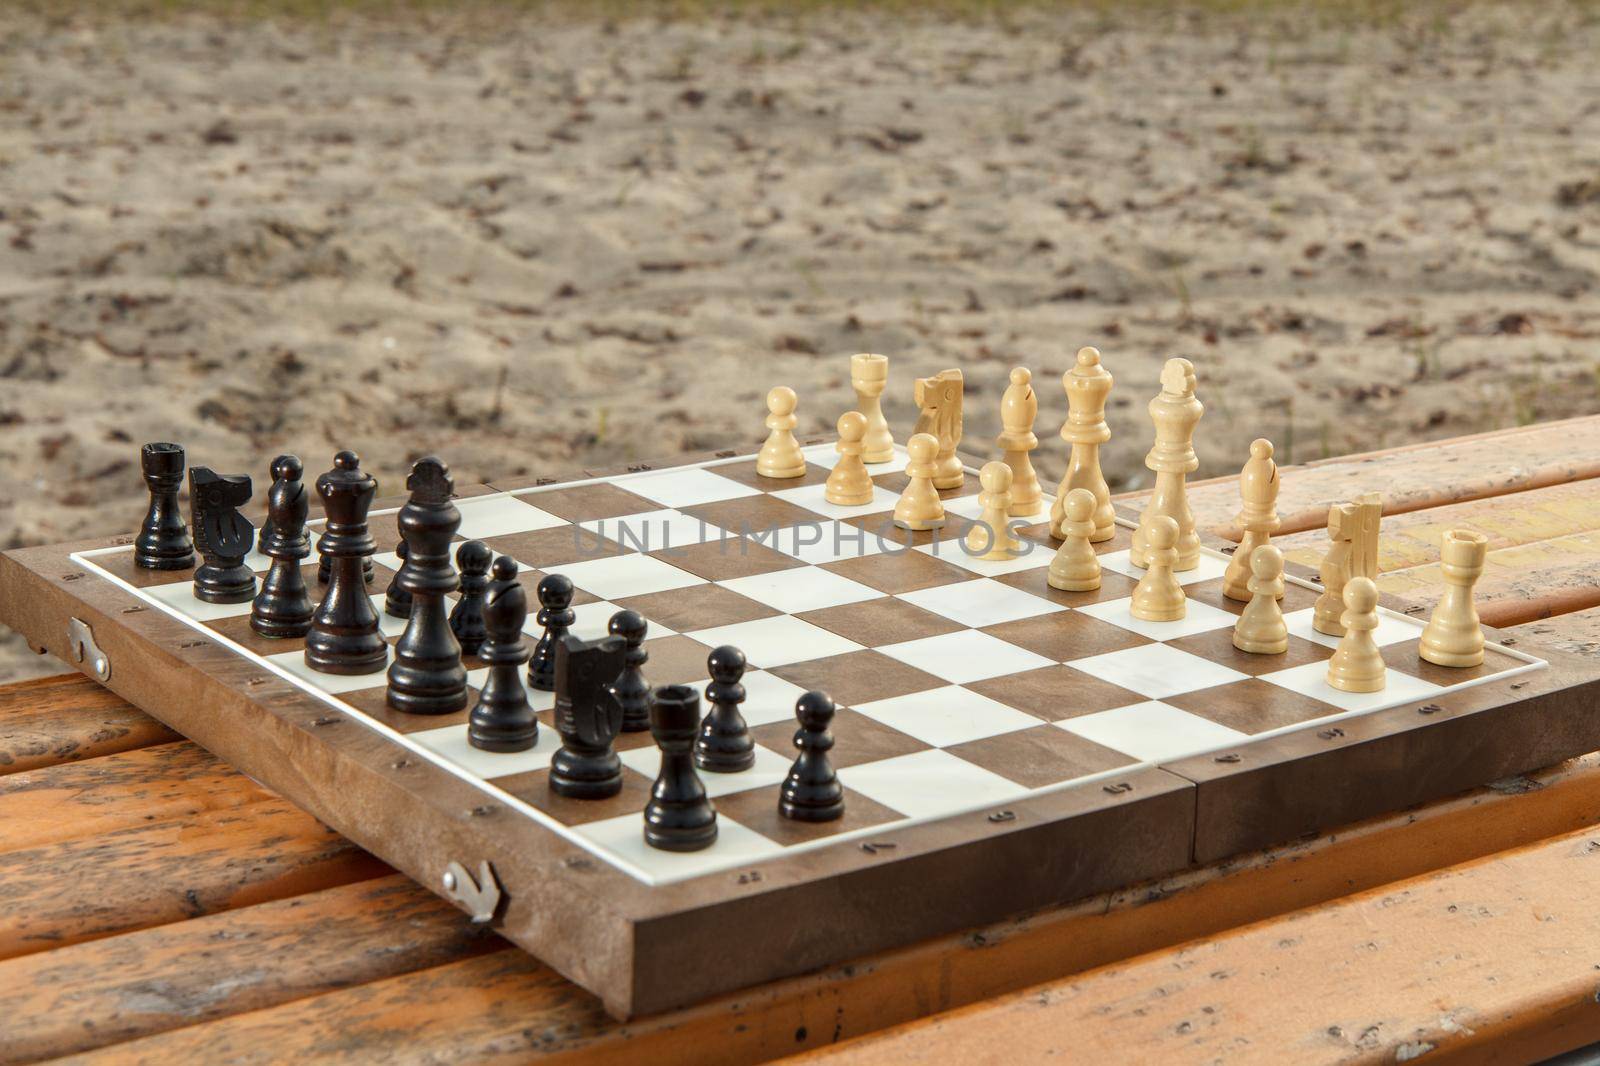 Chess board with chess pieces on wooden bench. Outdoors chess game with wooden chess pieces